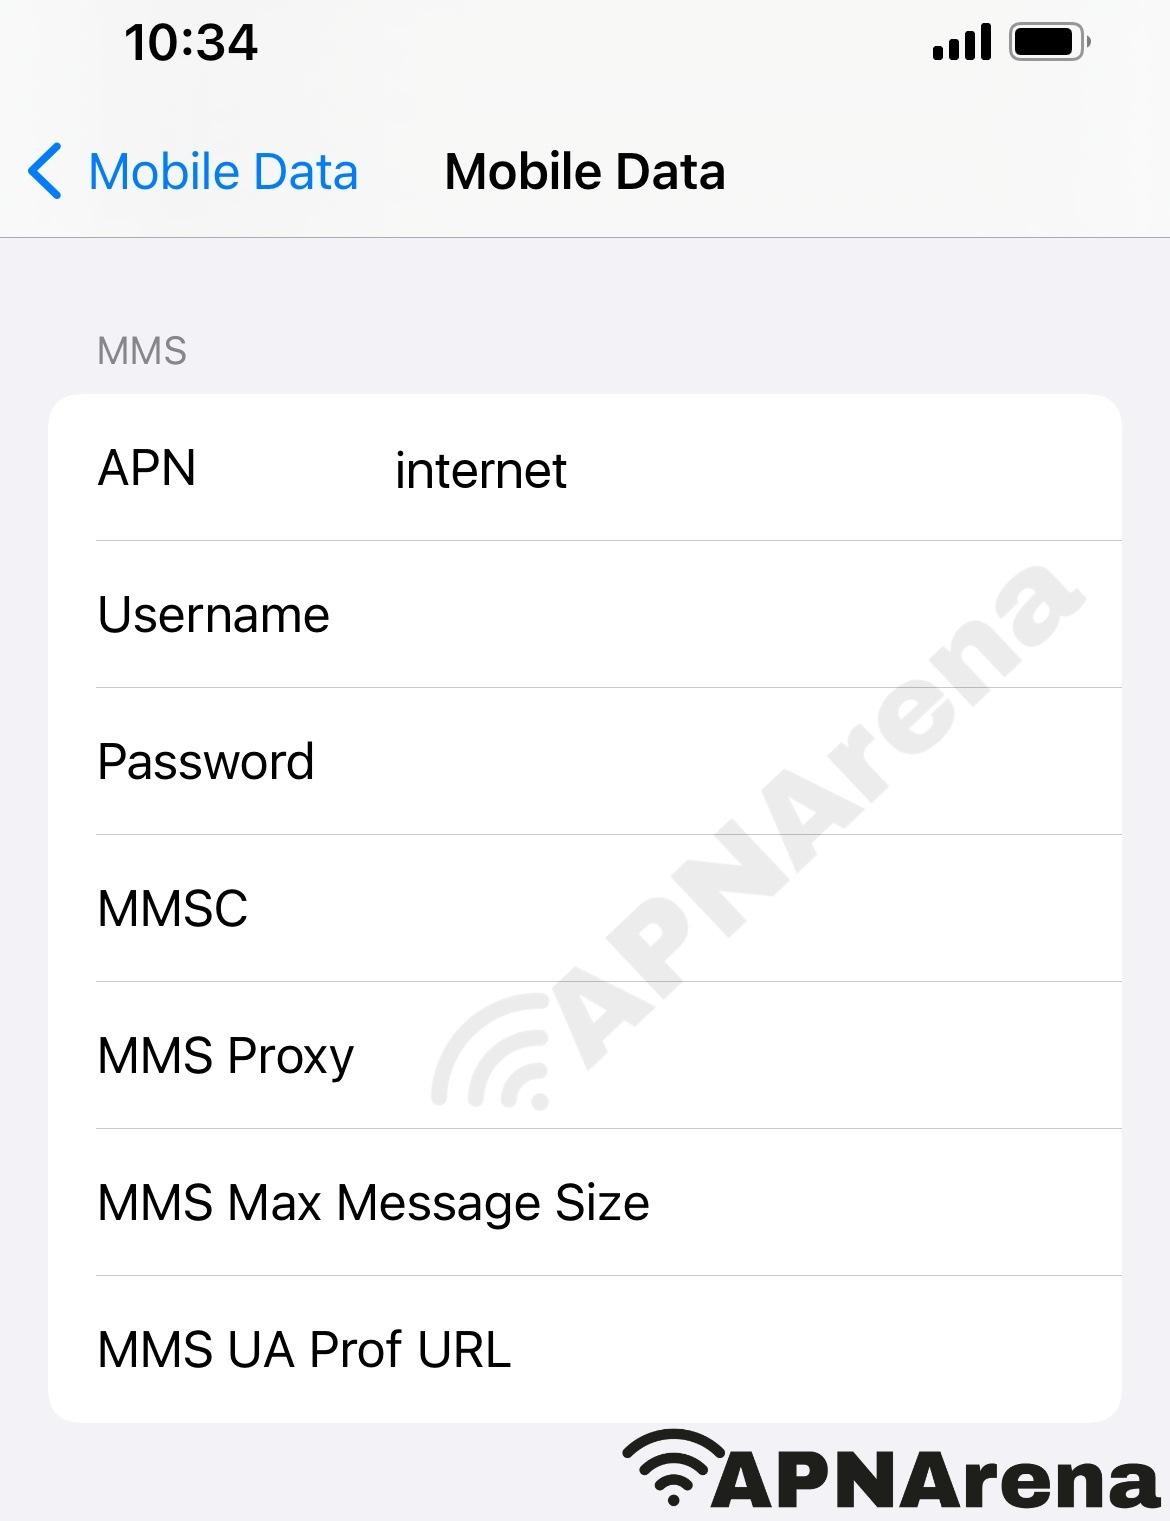 Glo Mobile Nigeria MMS Settings for iPhone